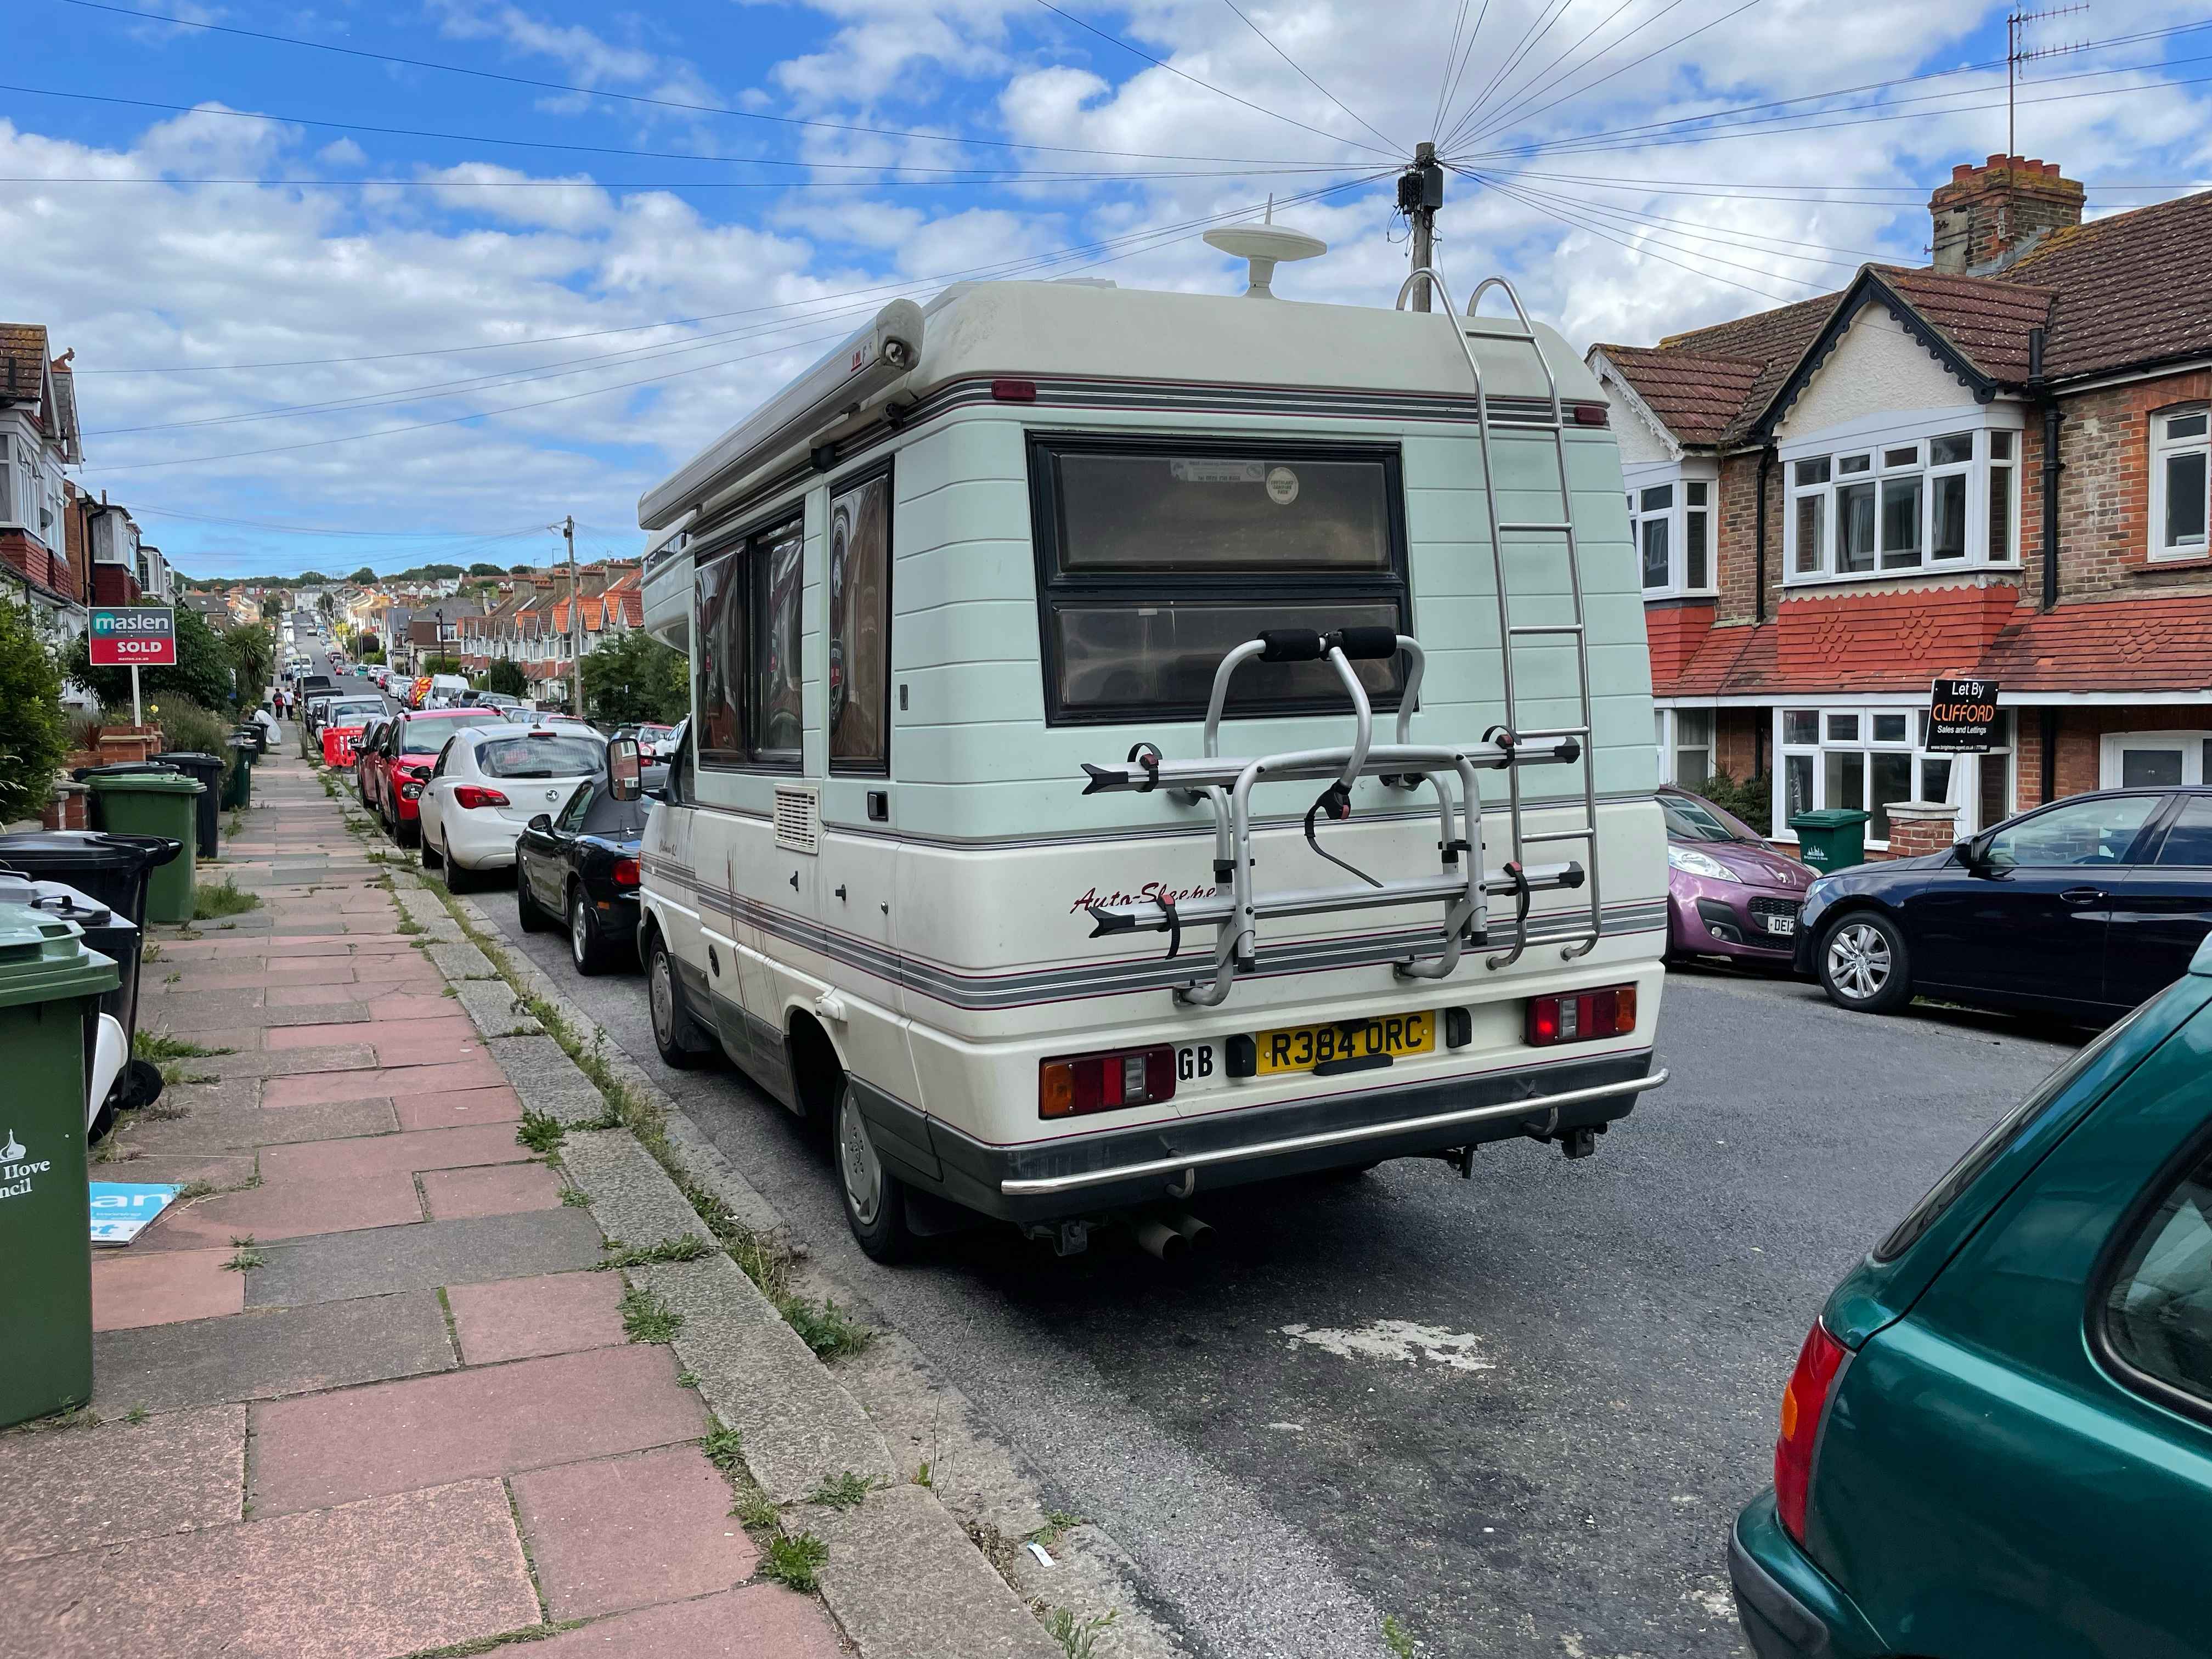 Photograph of R384 ORC - a Beige Volkswagen Transporter camper van parked in Hollingdean by a non-resident, and potentially abandoned. The third of twelve photographs supplied by the residents of Hollingdean.